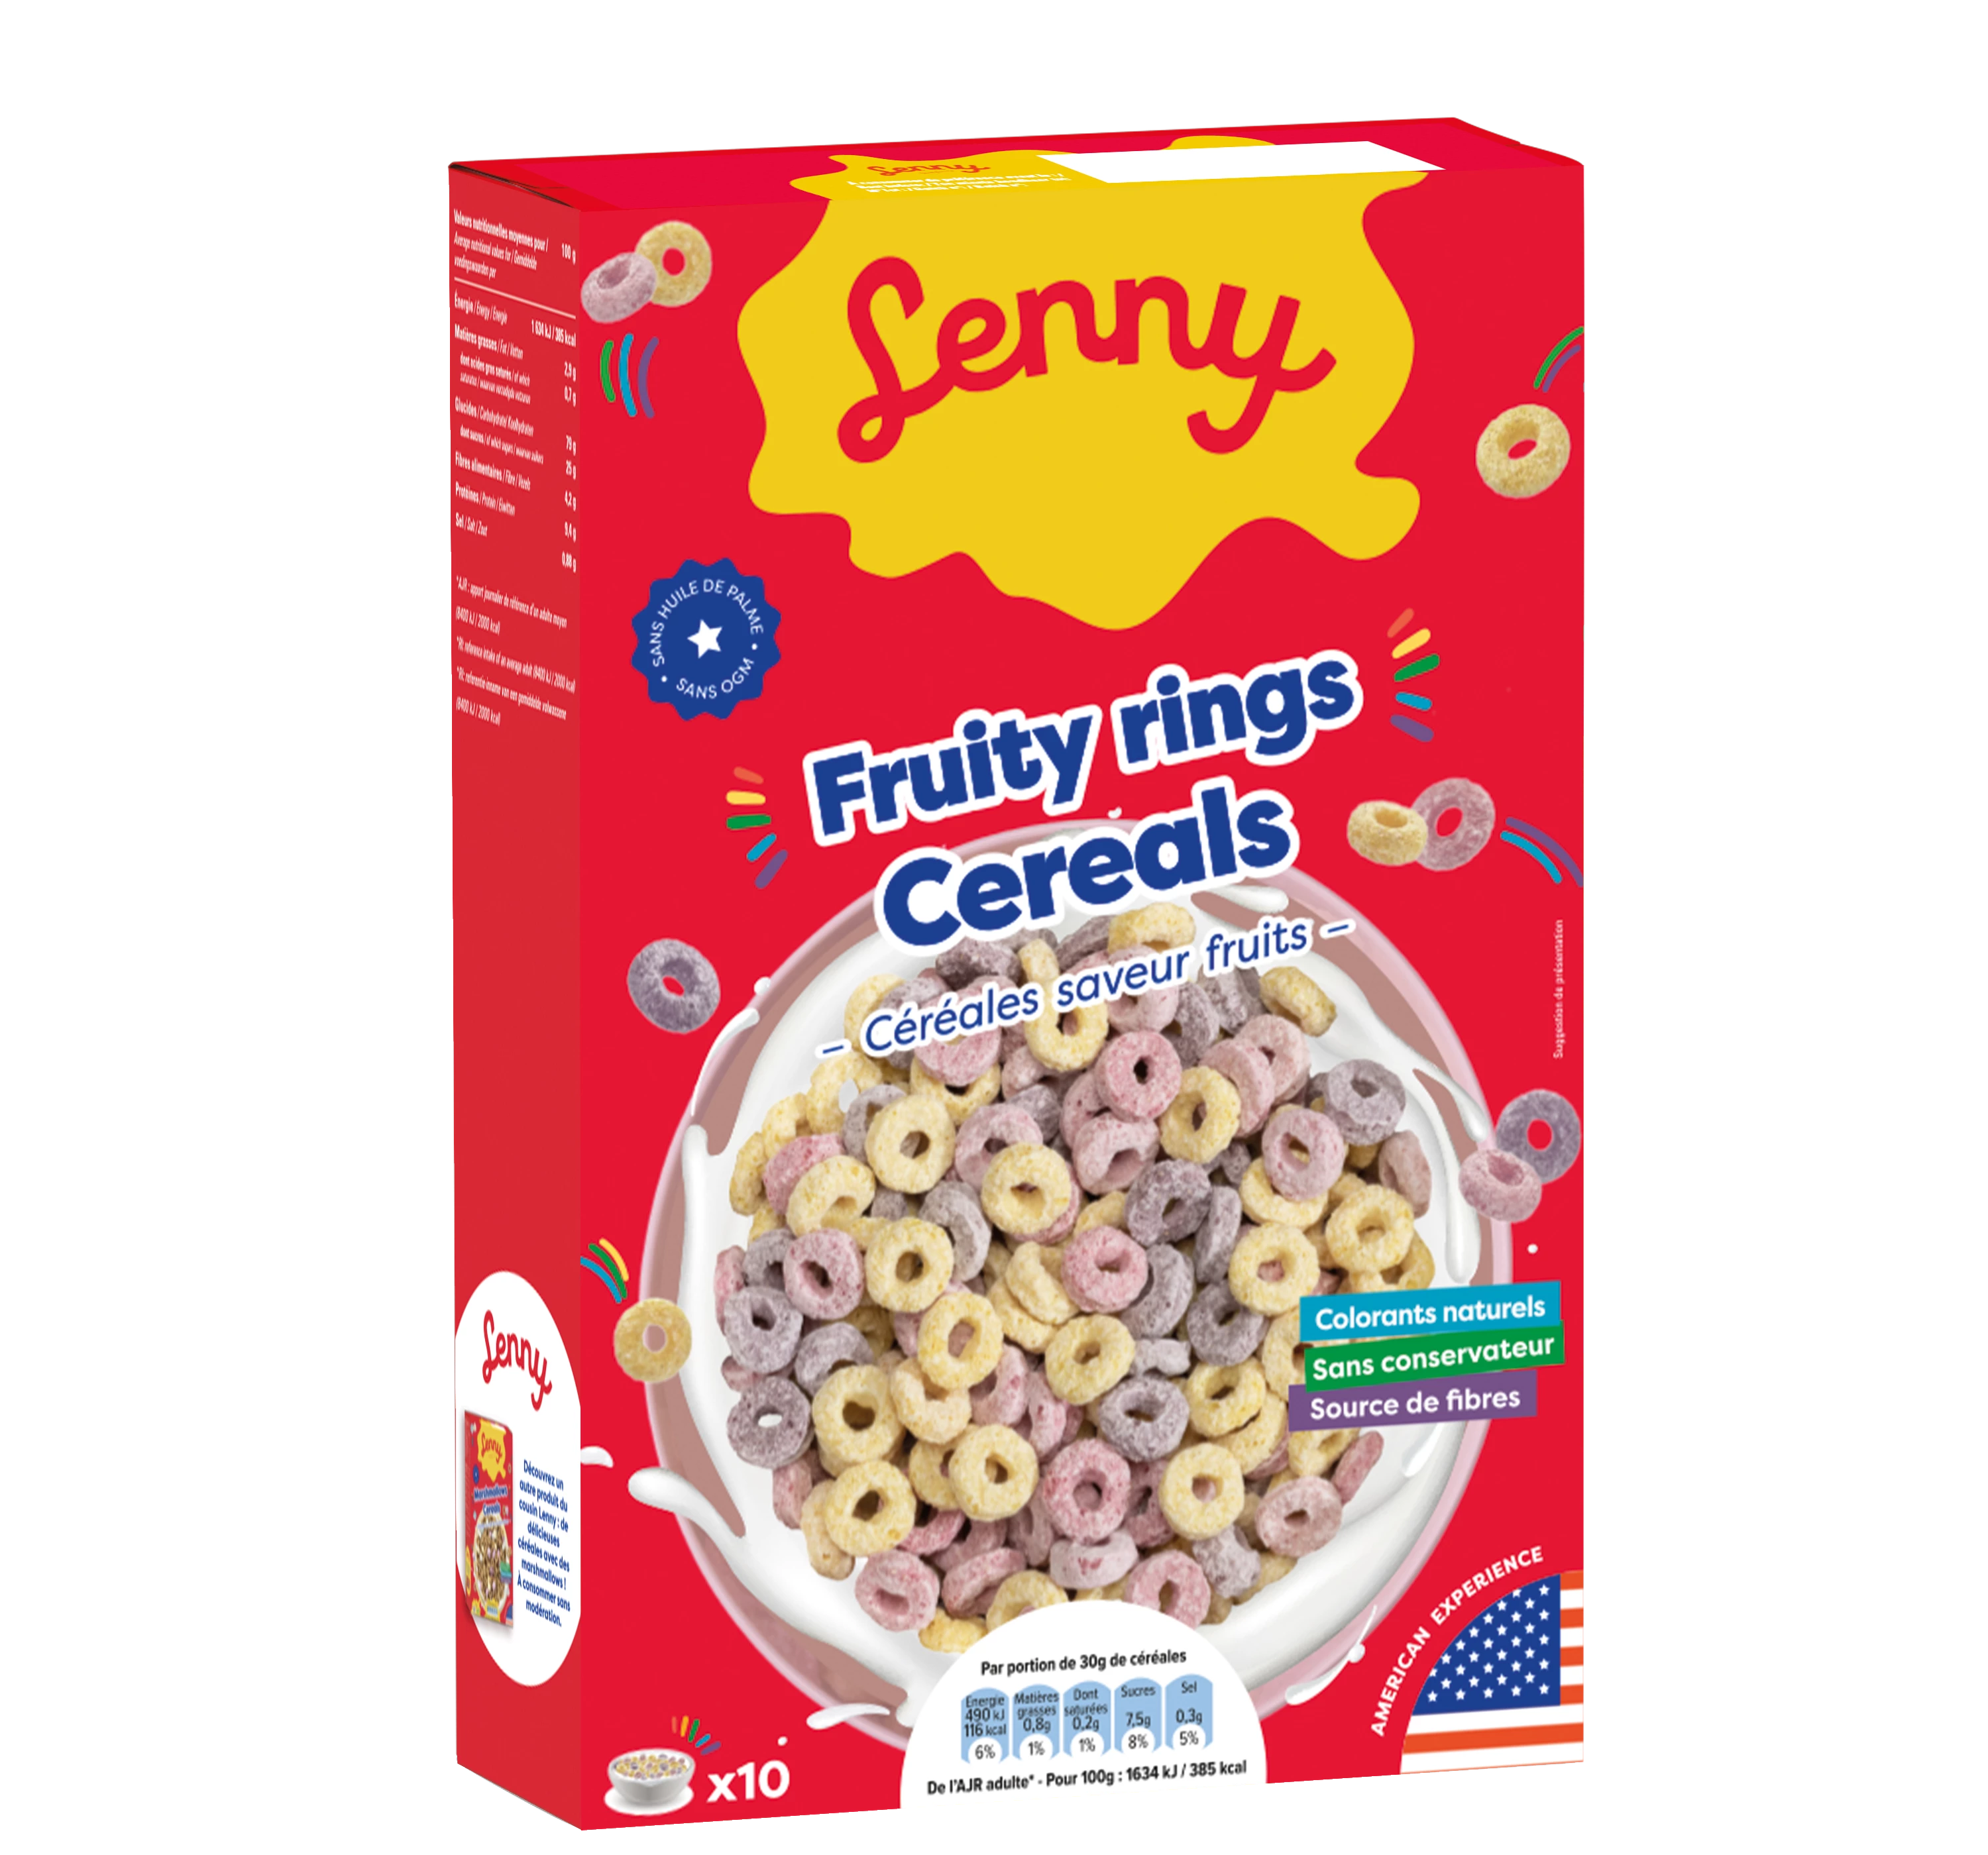 Cereales Anillos Frutales, 12x300 g- LENNY